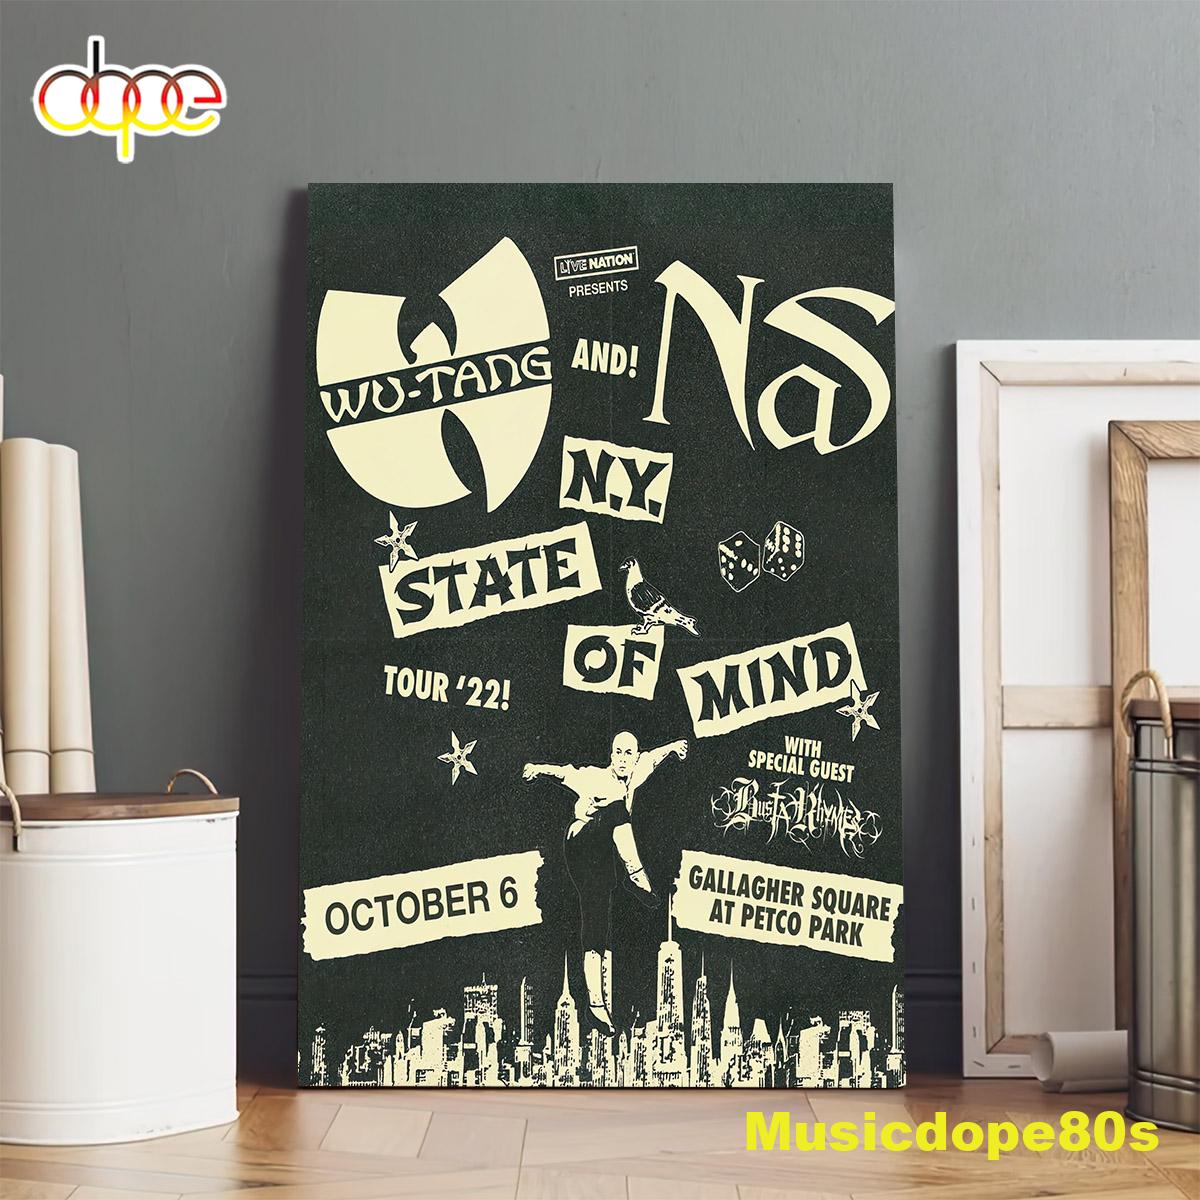 Wu-tang Clan New York State Of Mind Tour With Nas & Busta Rhymes On 10/6 Beach Poster Canvas